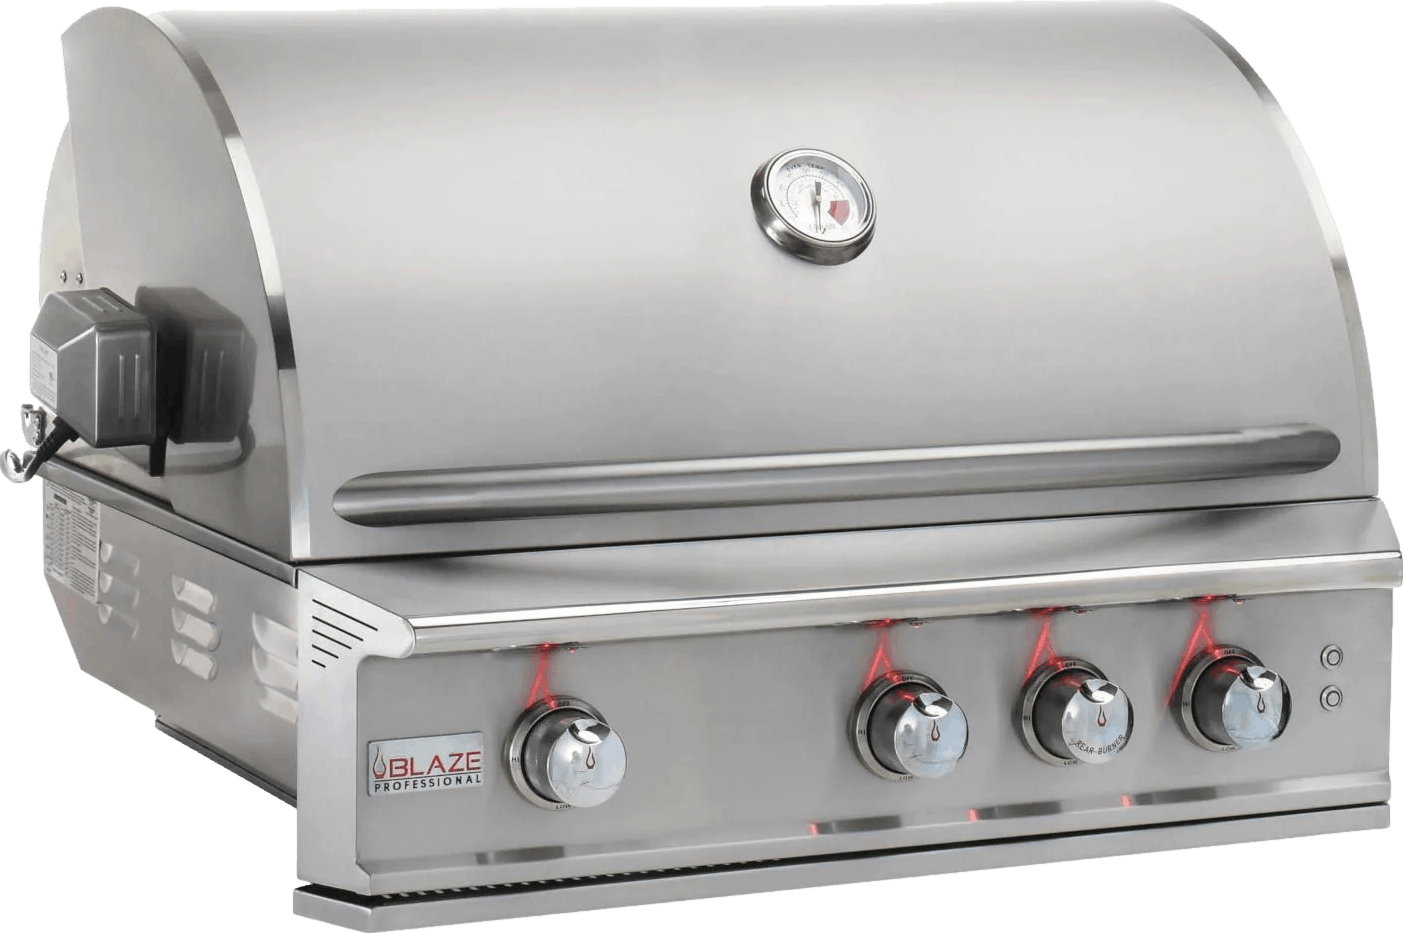 Blaze Professional LUX 3-Burner Built-In Gas Grill with Rear Infrared Burner · 34 in. · Propane